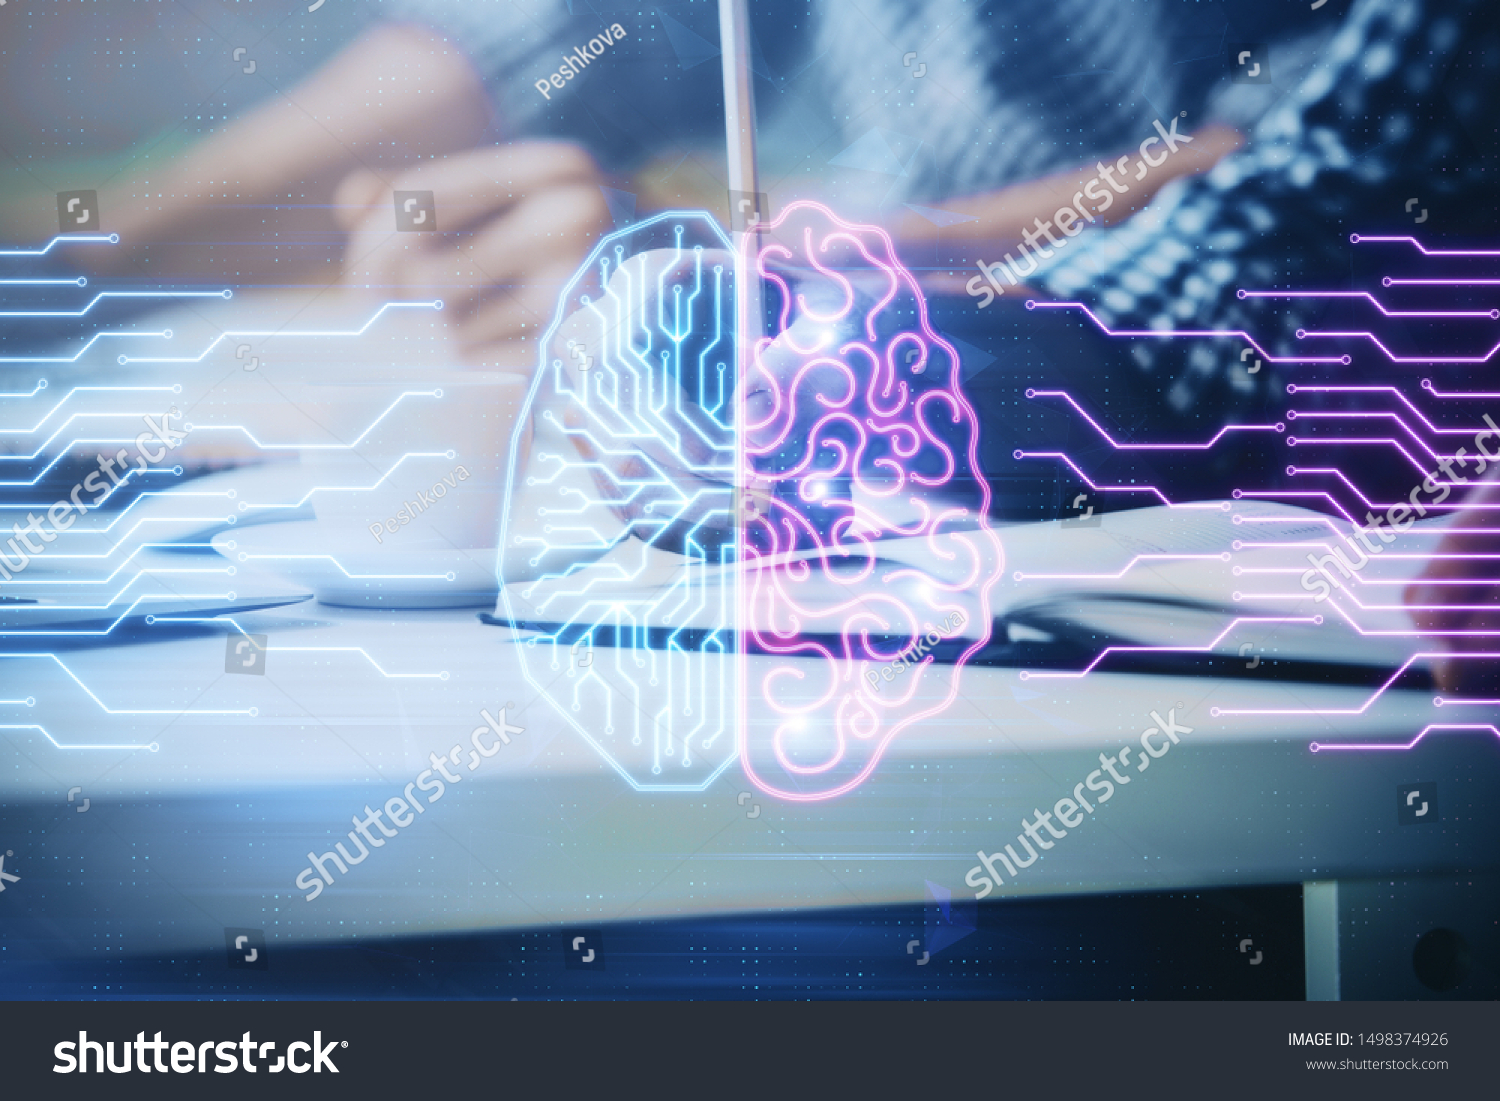 Man with multi exposure atificial intelligence brain icons. #1498374926